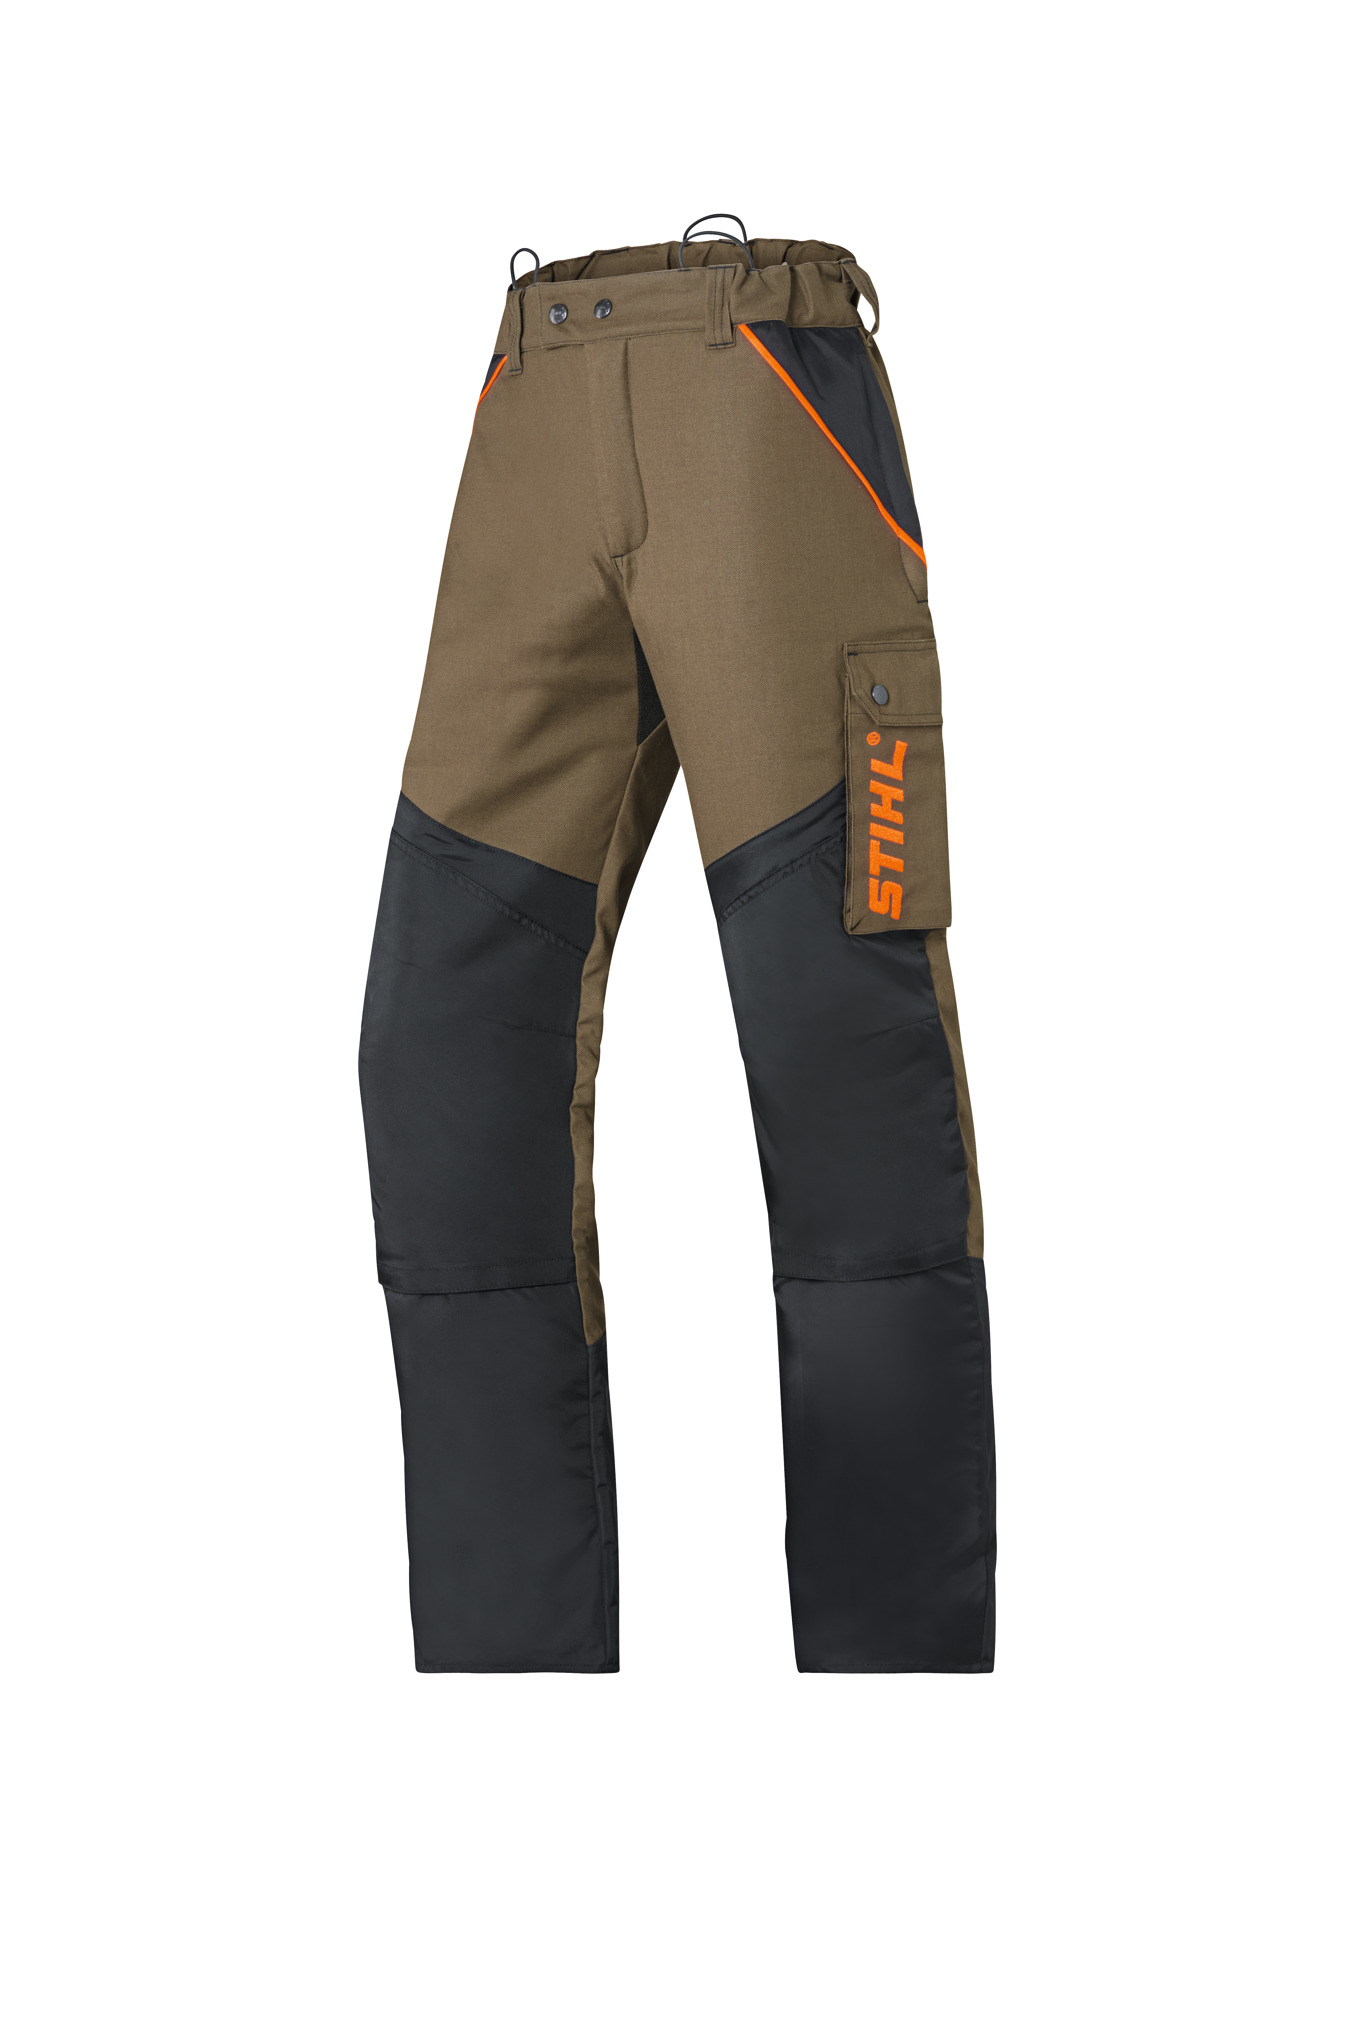 FS 3PROTECT protective trousers